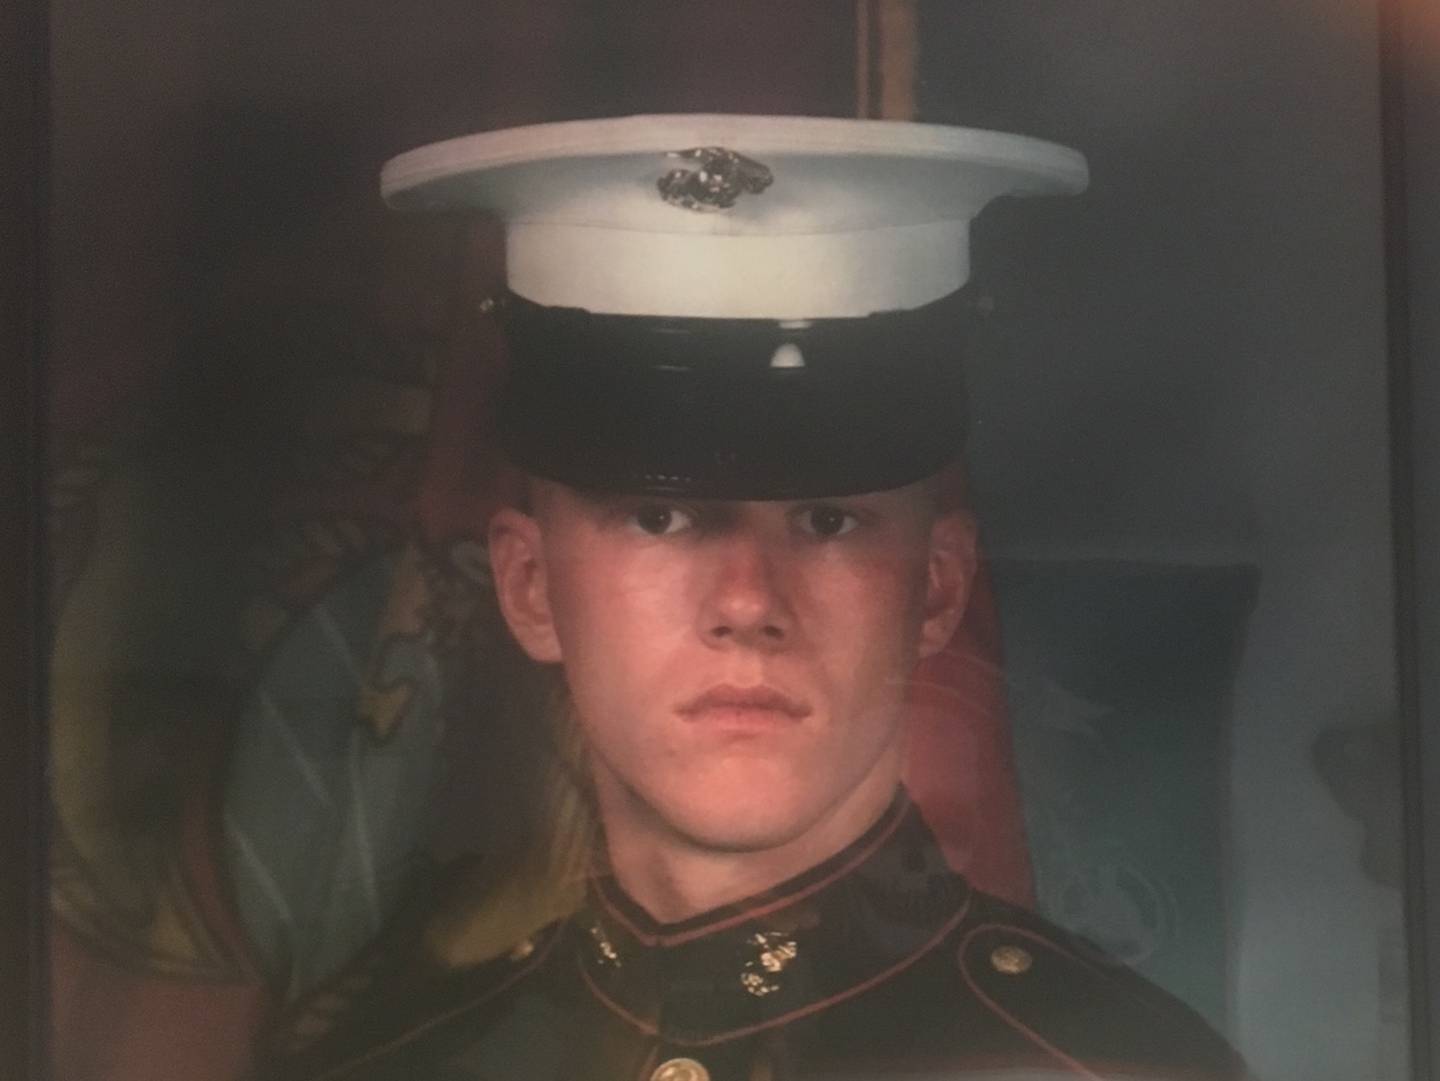 Family members of Cpl. Ryan J Cummings, pictured above, are trying to get the Crystal Lake Post Office renamed in his honor.